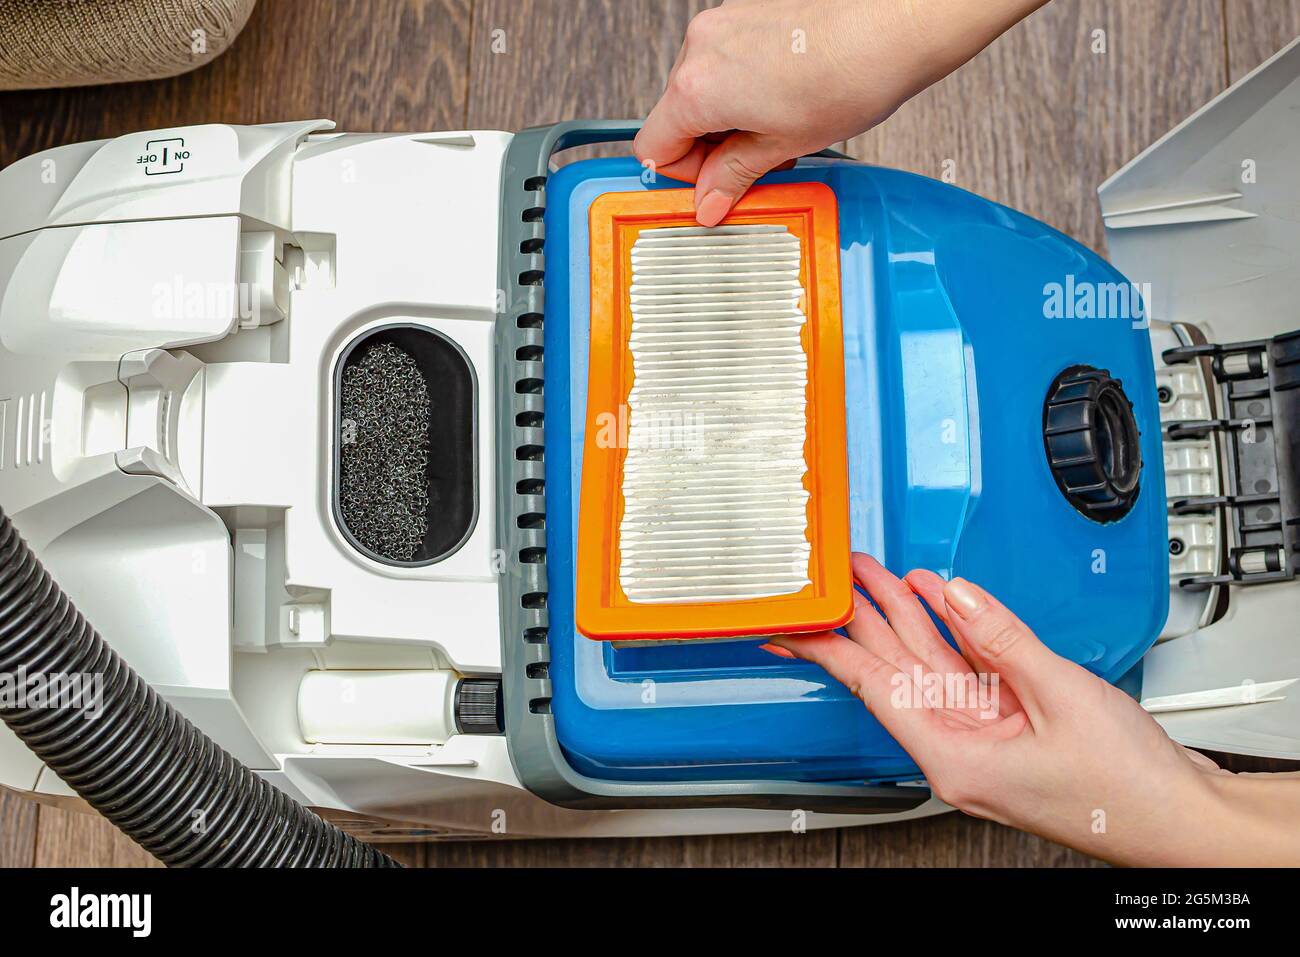 Manual replacement of the air filter in a modern washing vacuum cleaner. removes the filter of the vacuum cleaner by hand. Stock Photo